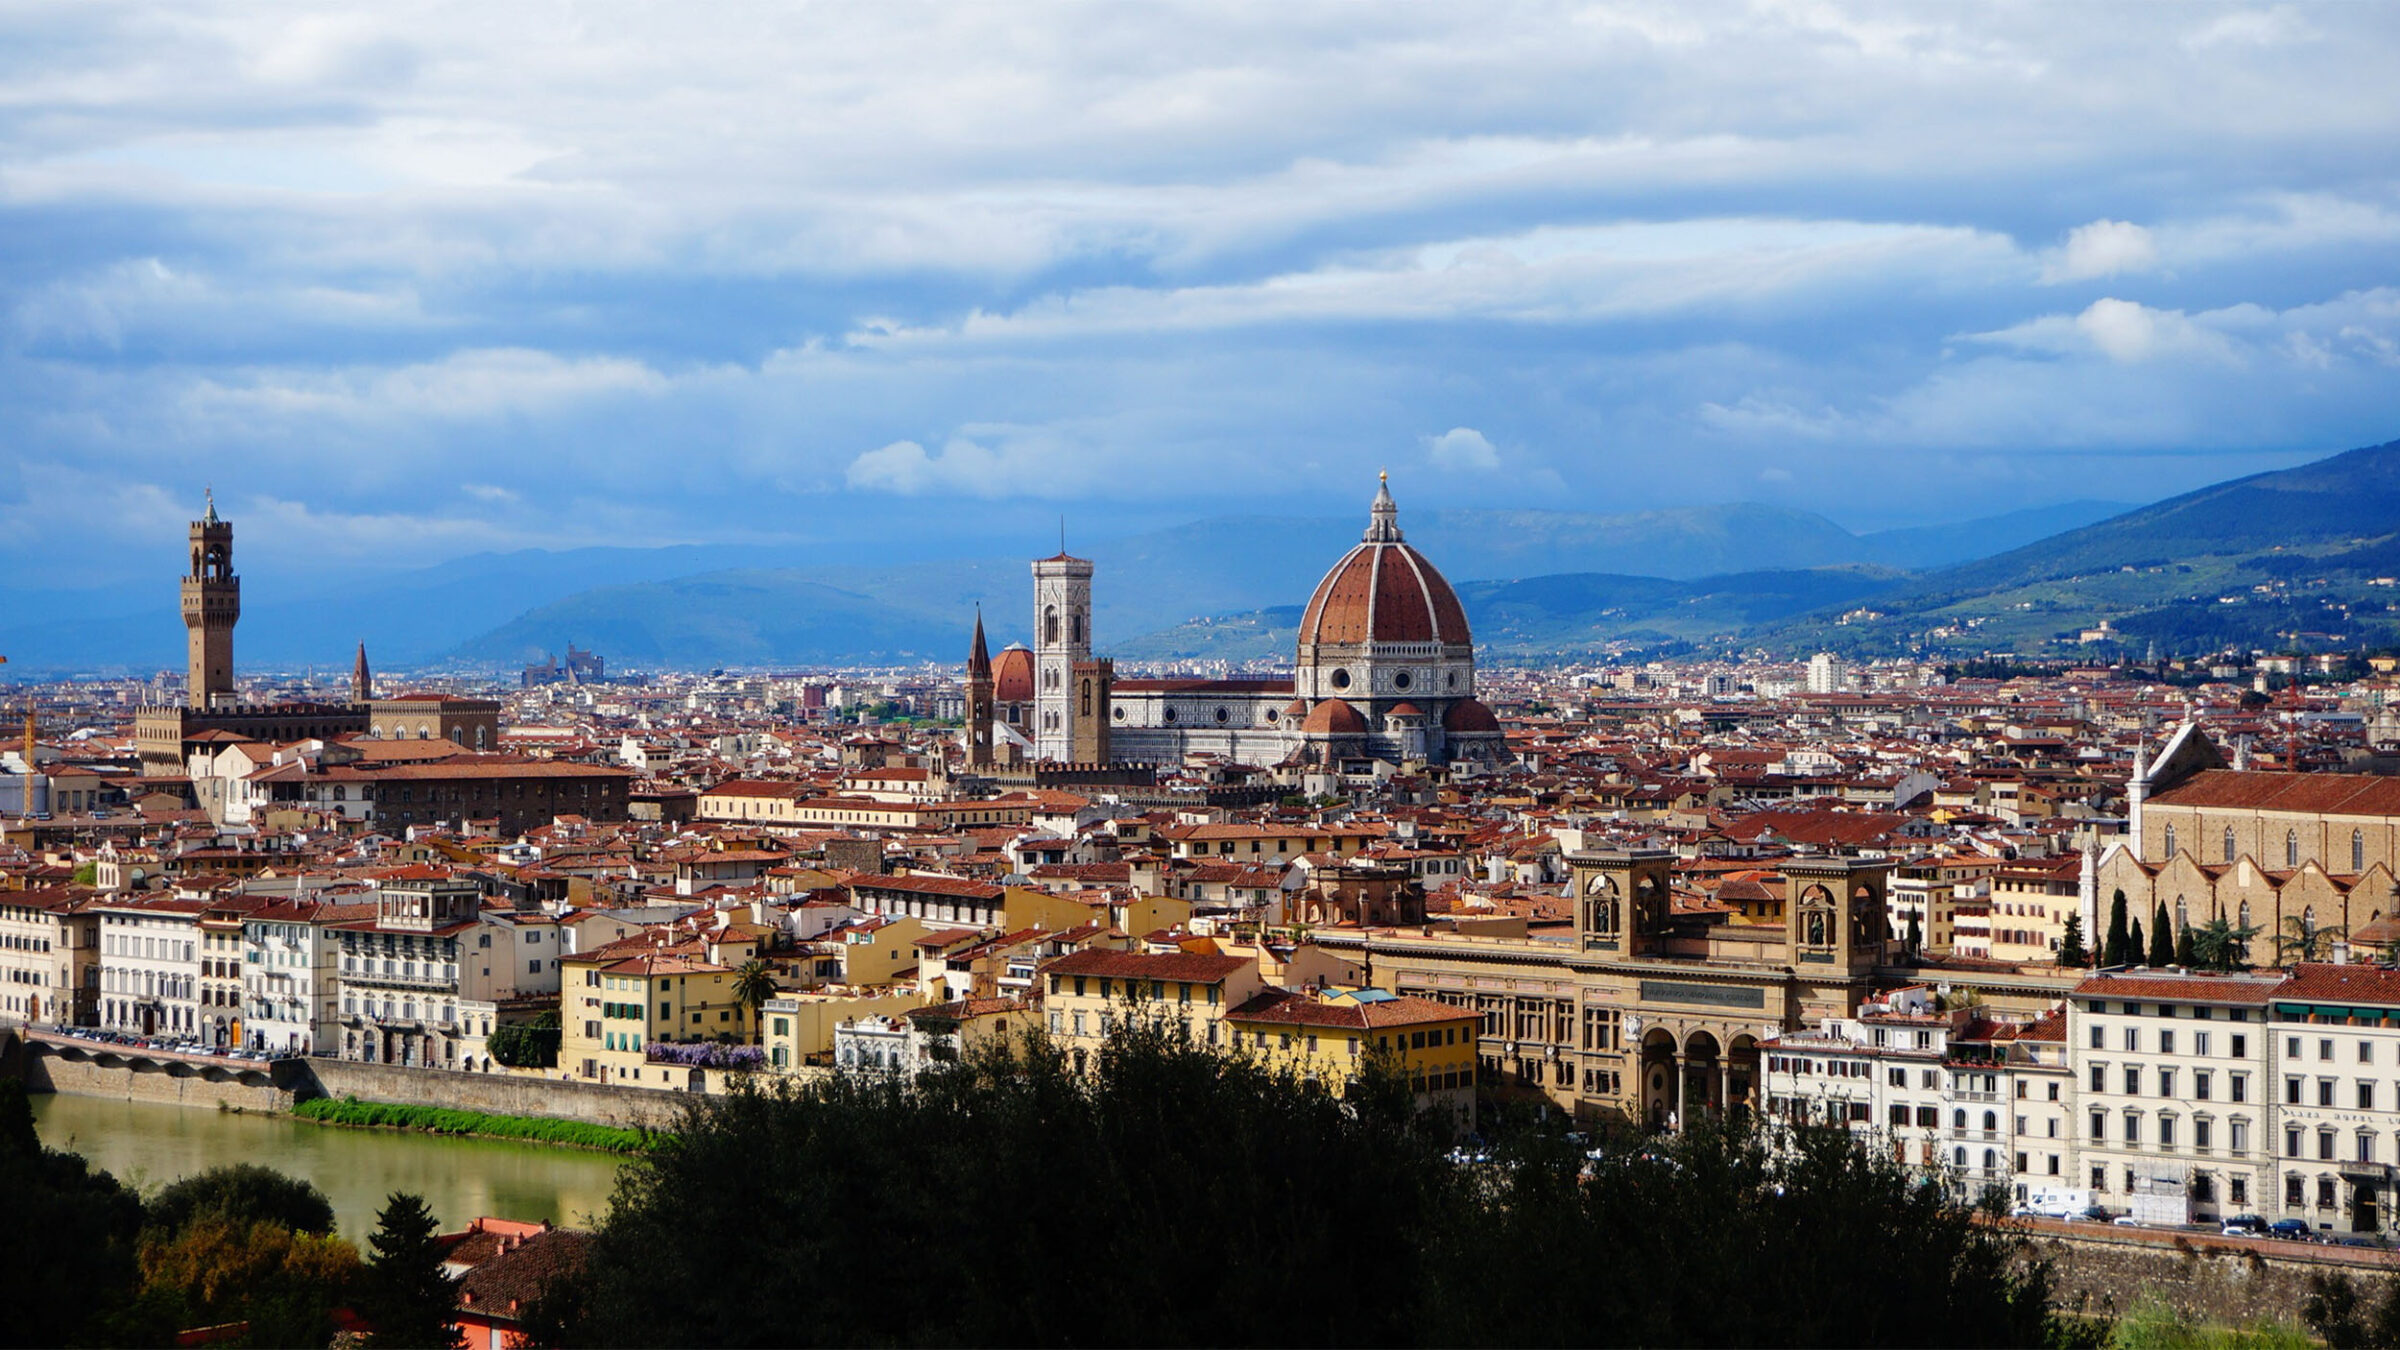 landscape shot of a city skyline in florence, italy